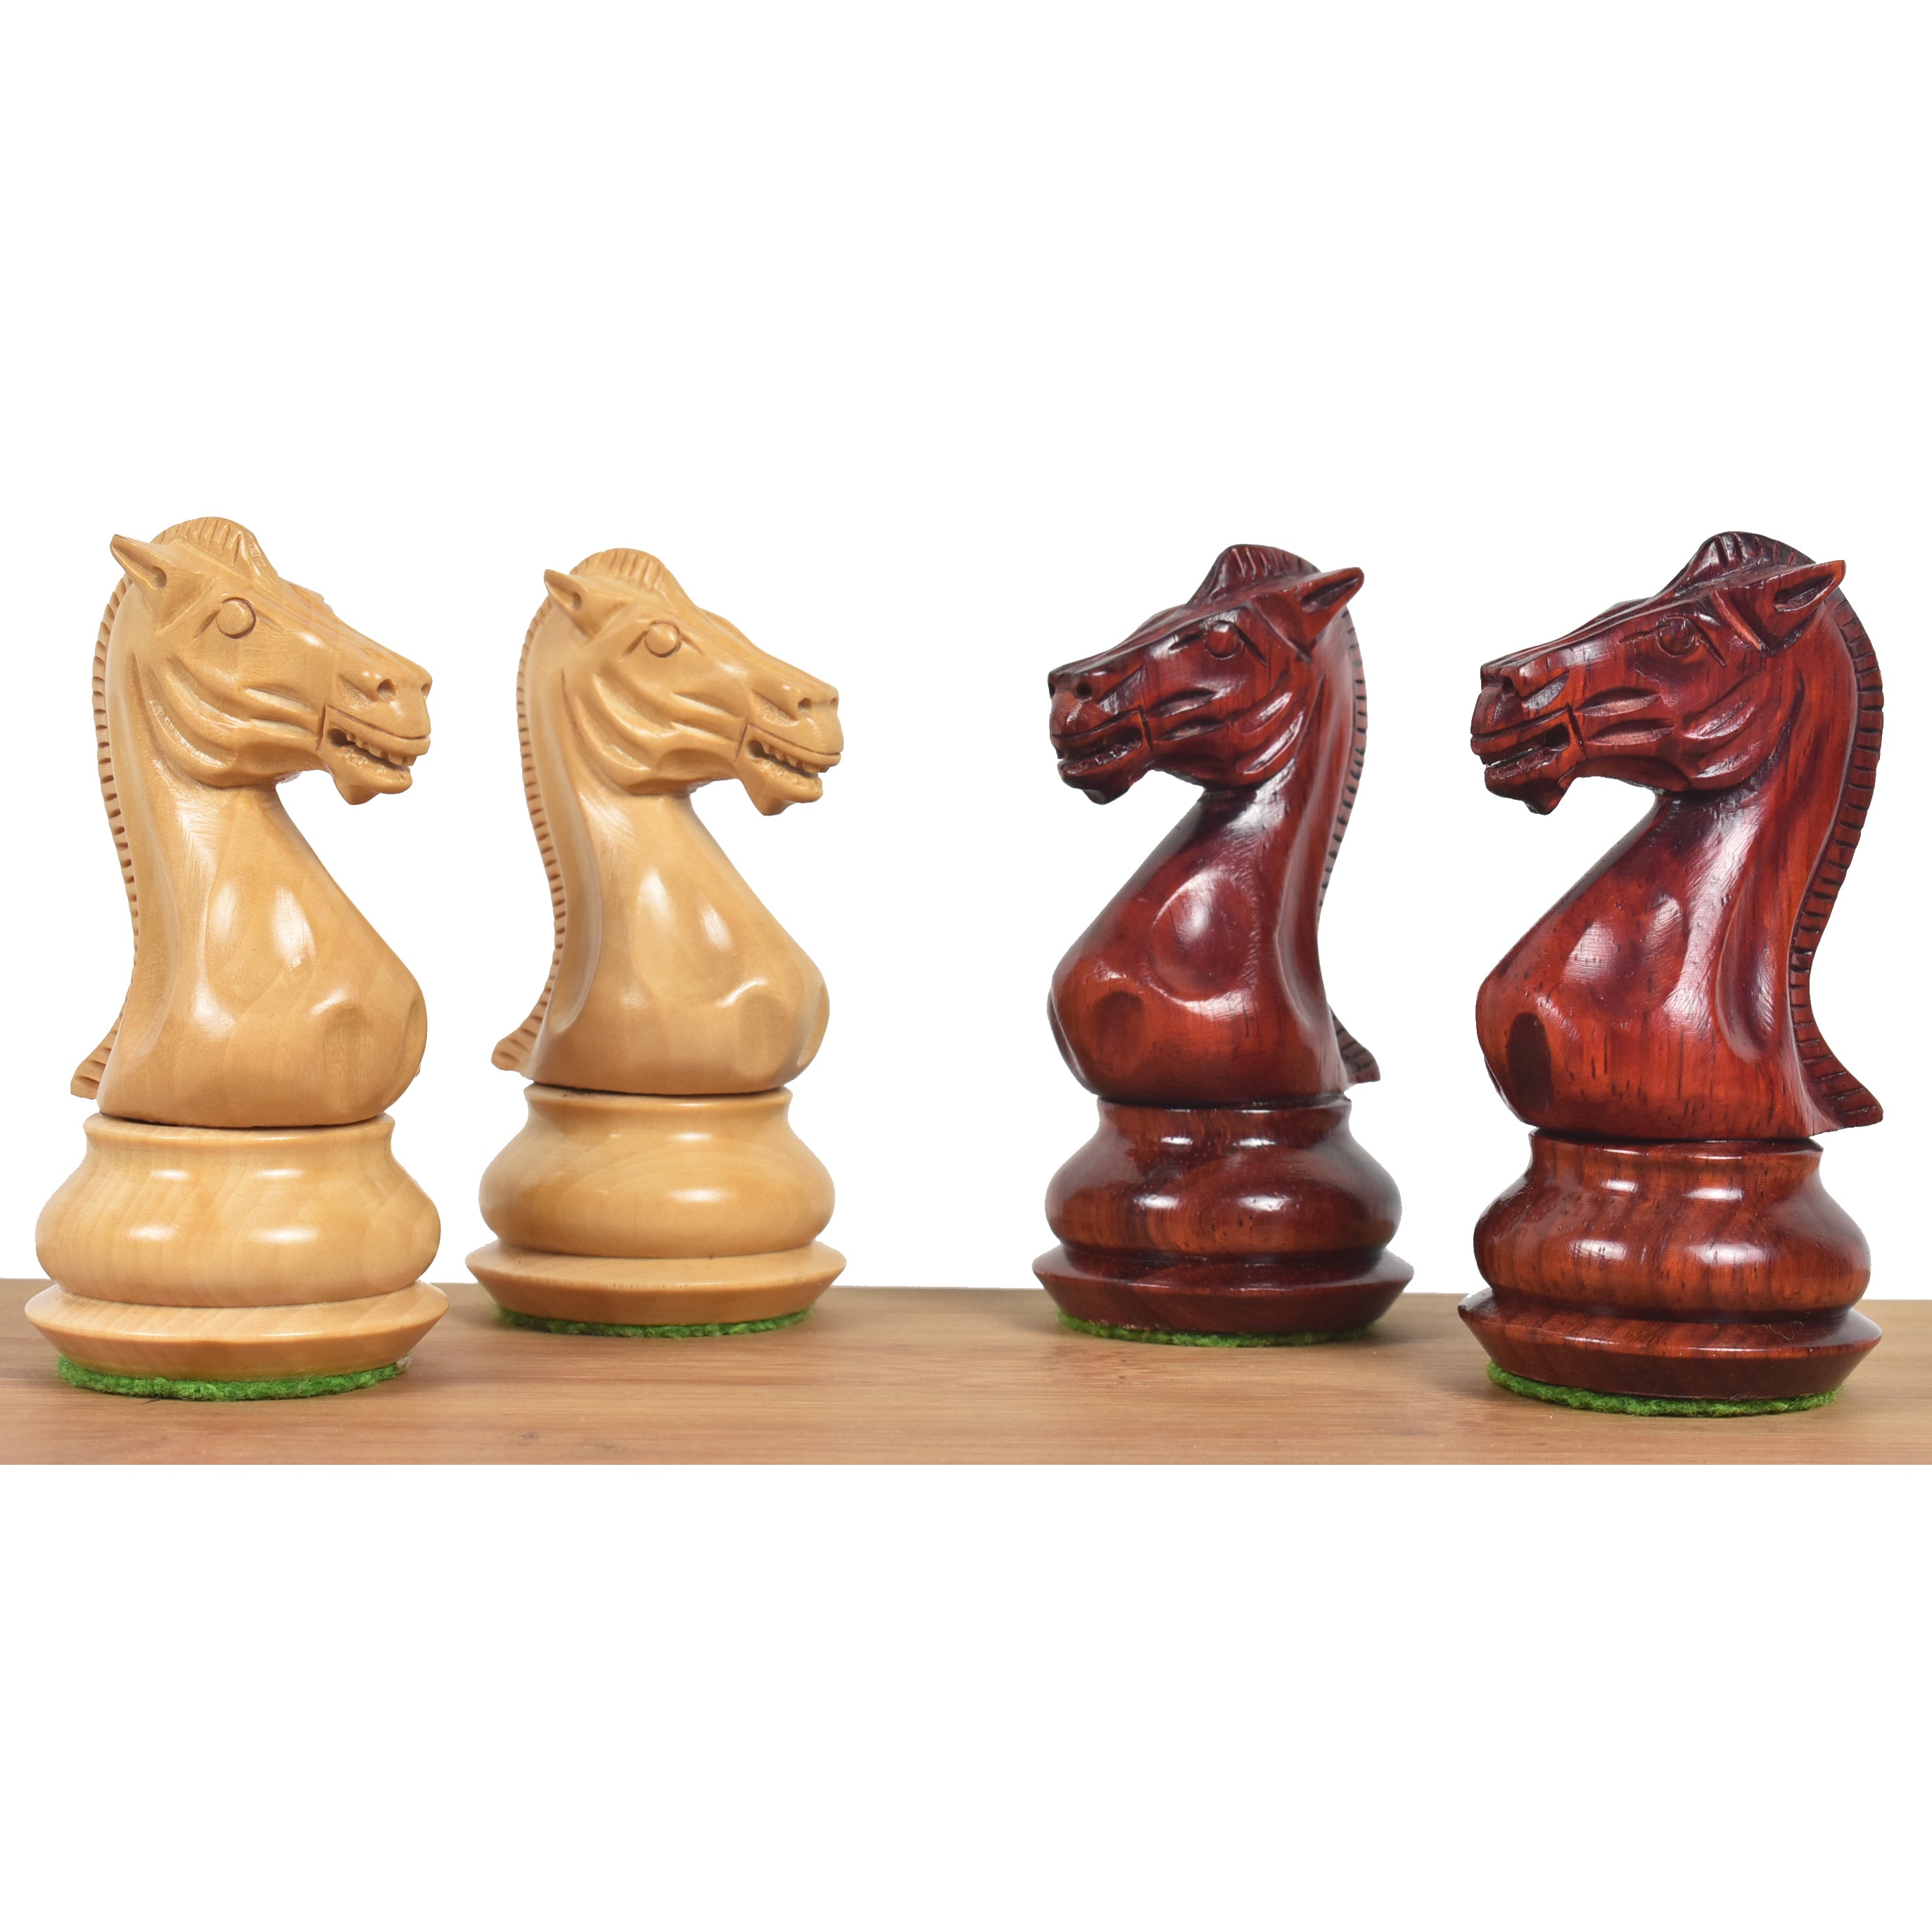 Combo of Chamfered Base Staunton Chess Set - Pieces in Bud Rosewood with Board and Box